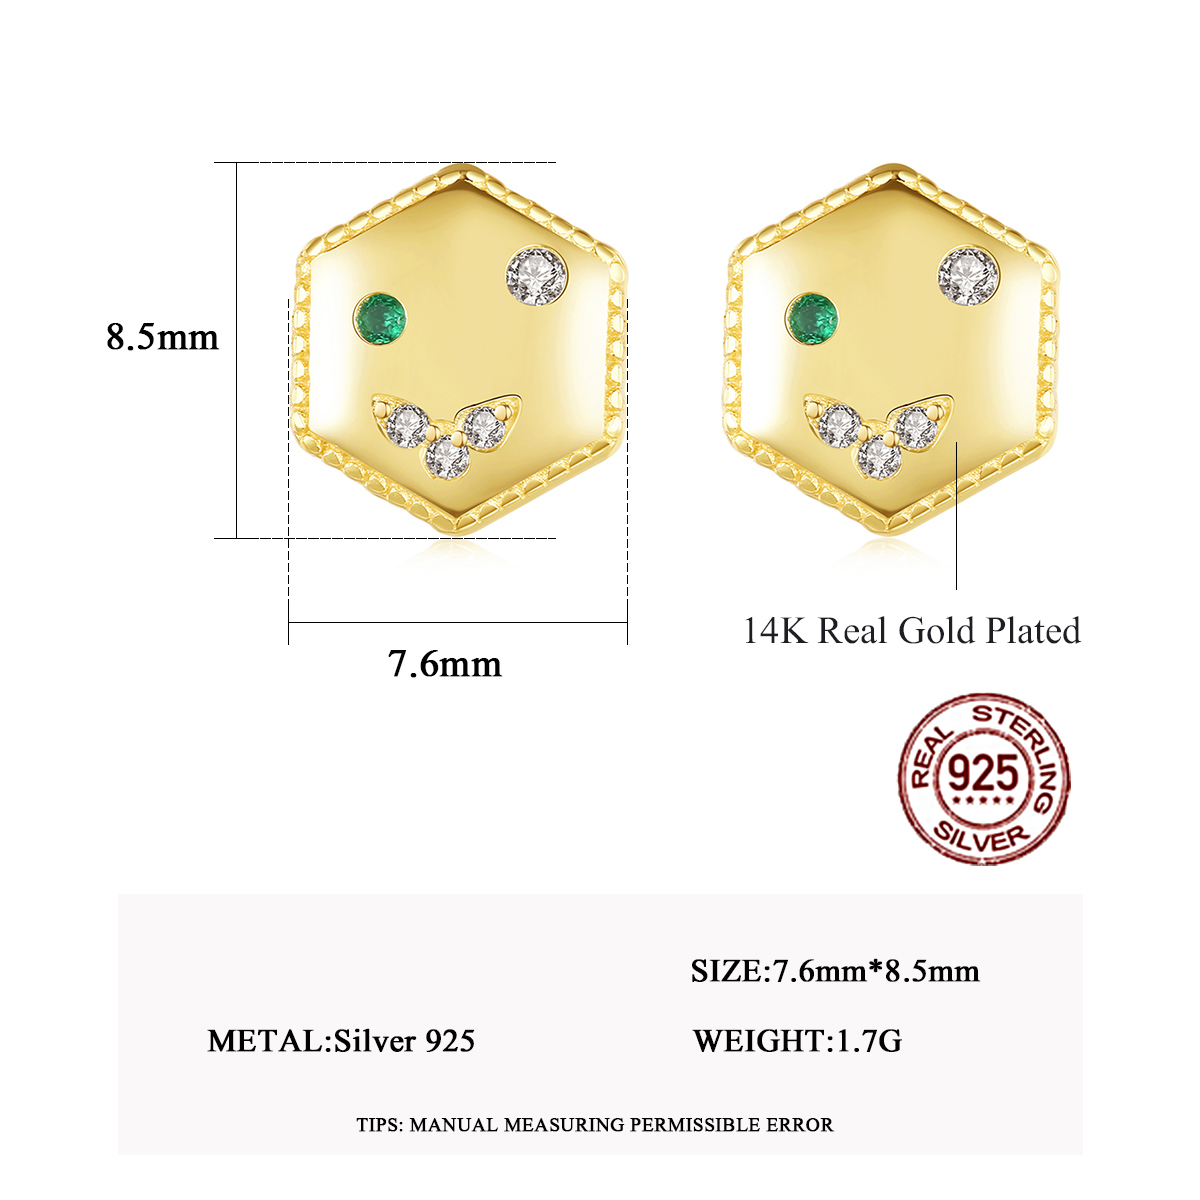 Cz 14K Gold Plated Hexagon Shaped Sterling Silver Stud Earrings